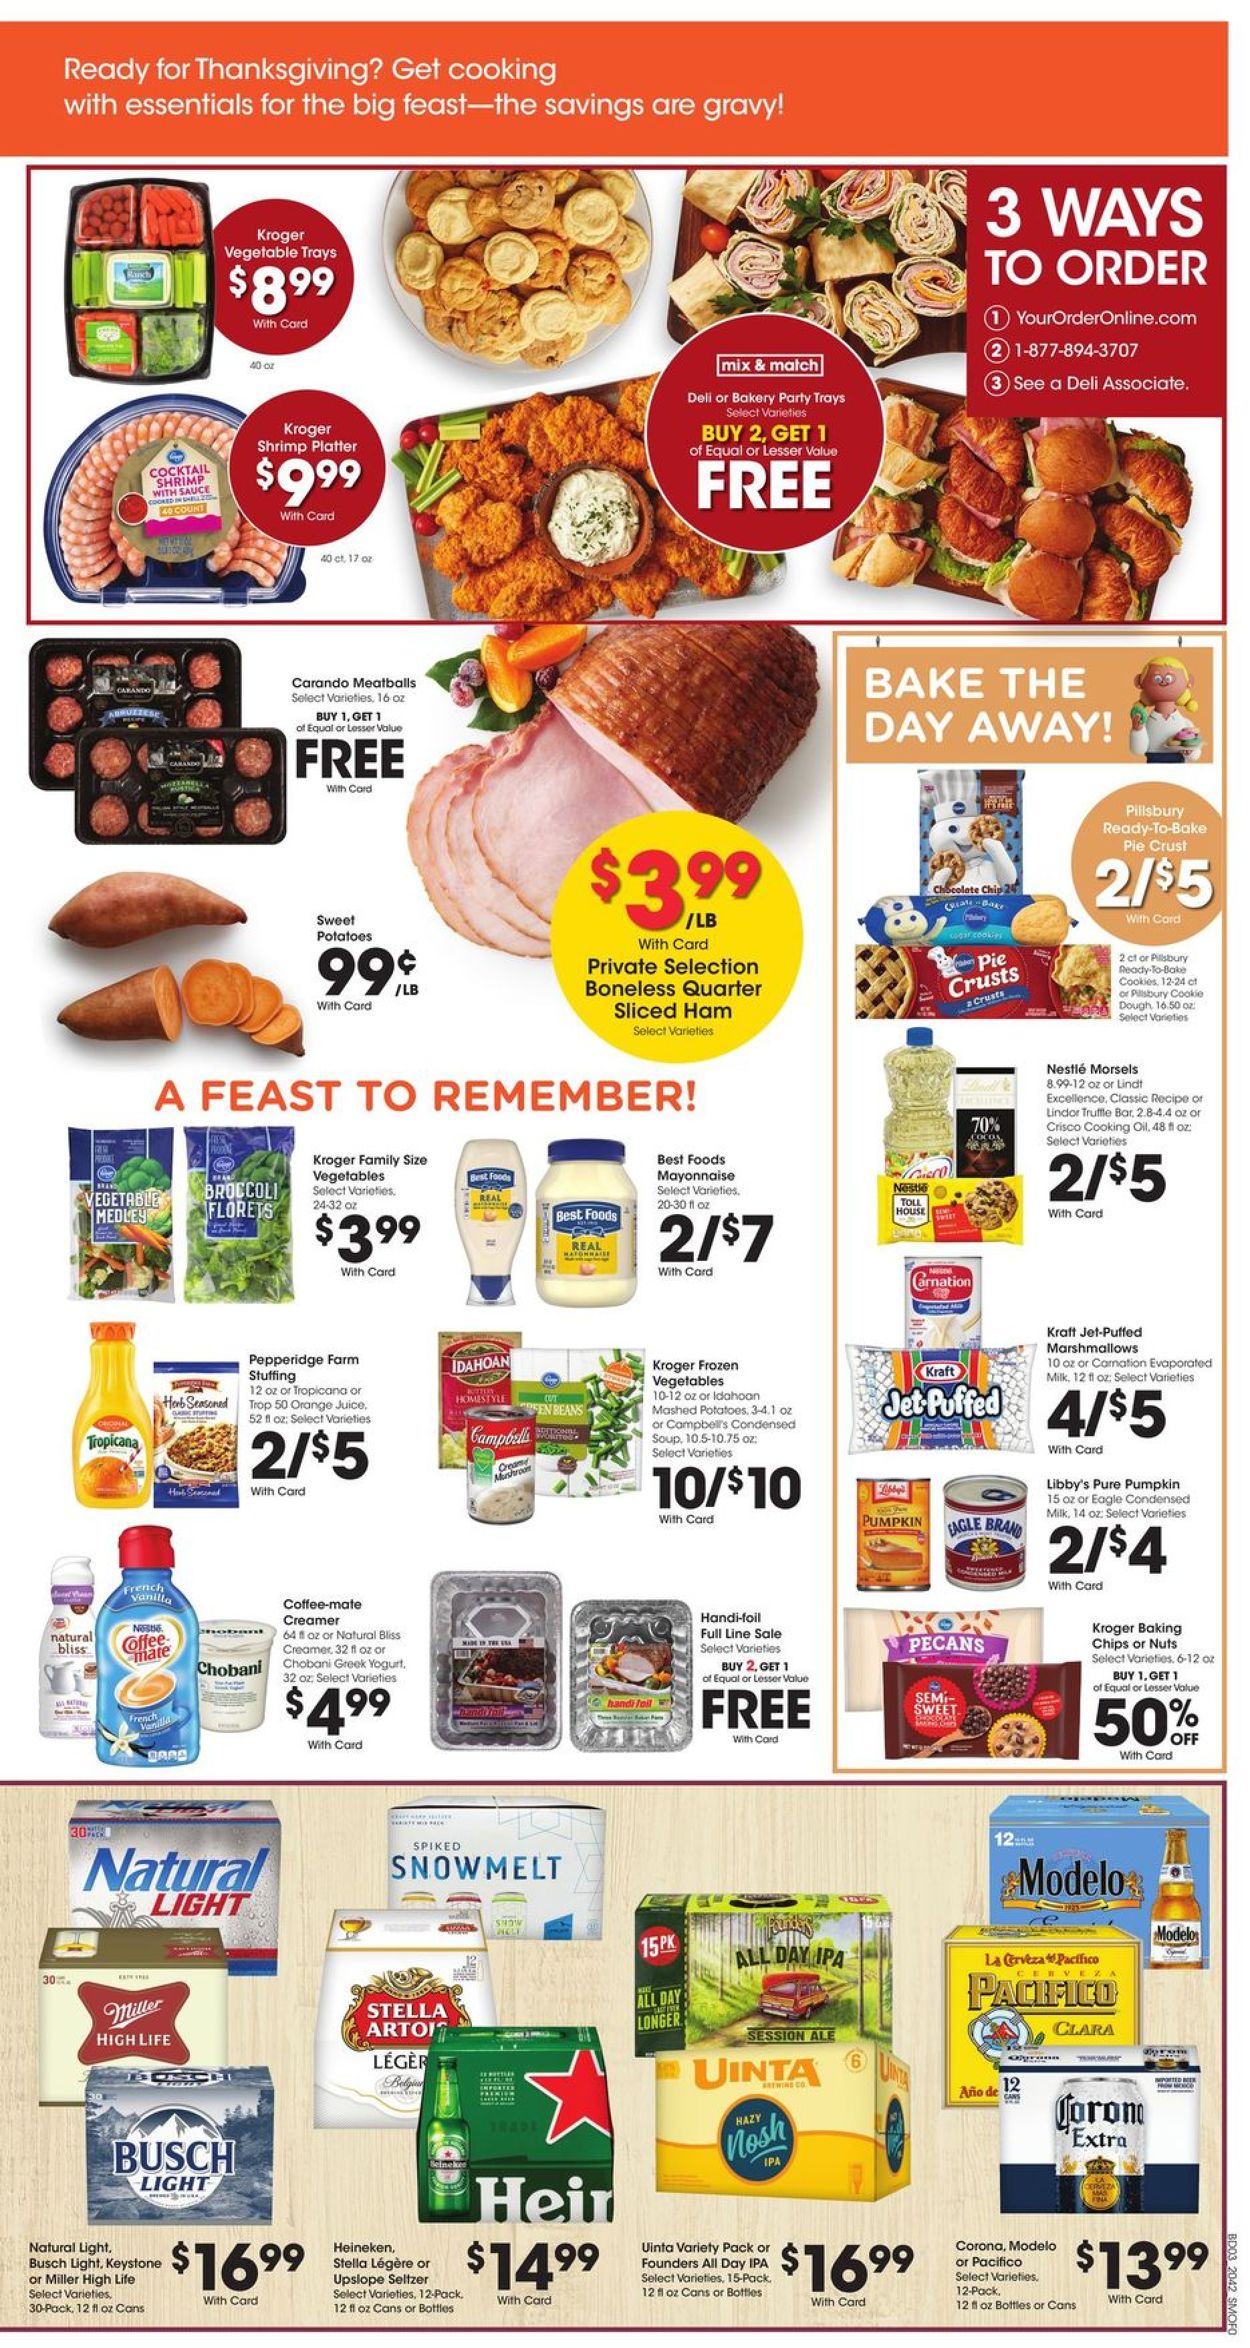 Smith's Thanksgiving ad 2020 Current weekly ad 11/18 11/26/2020 [3